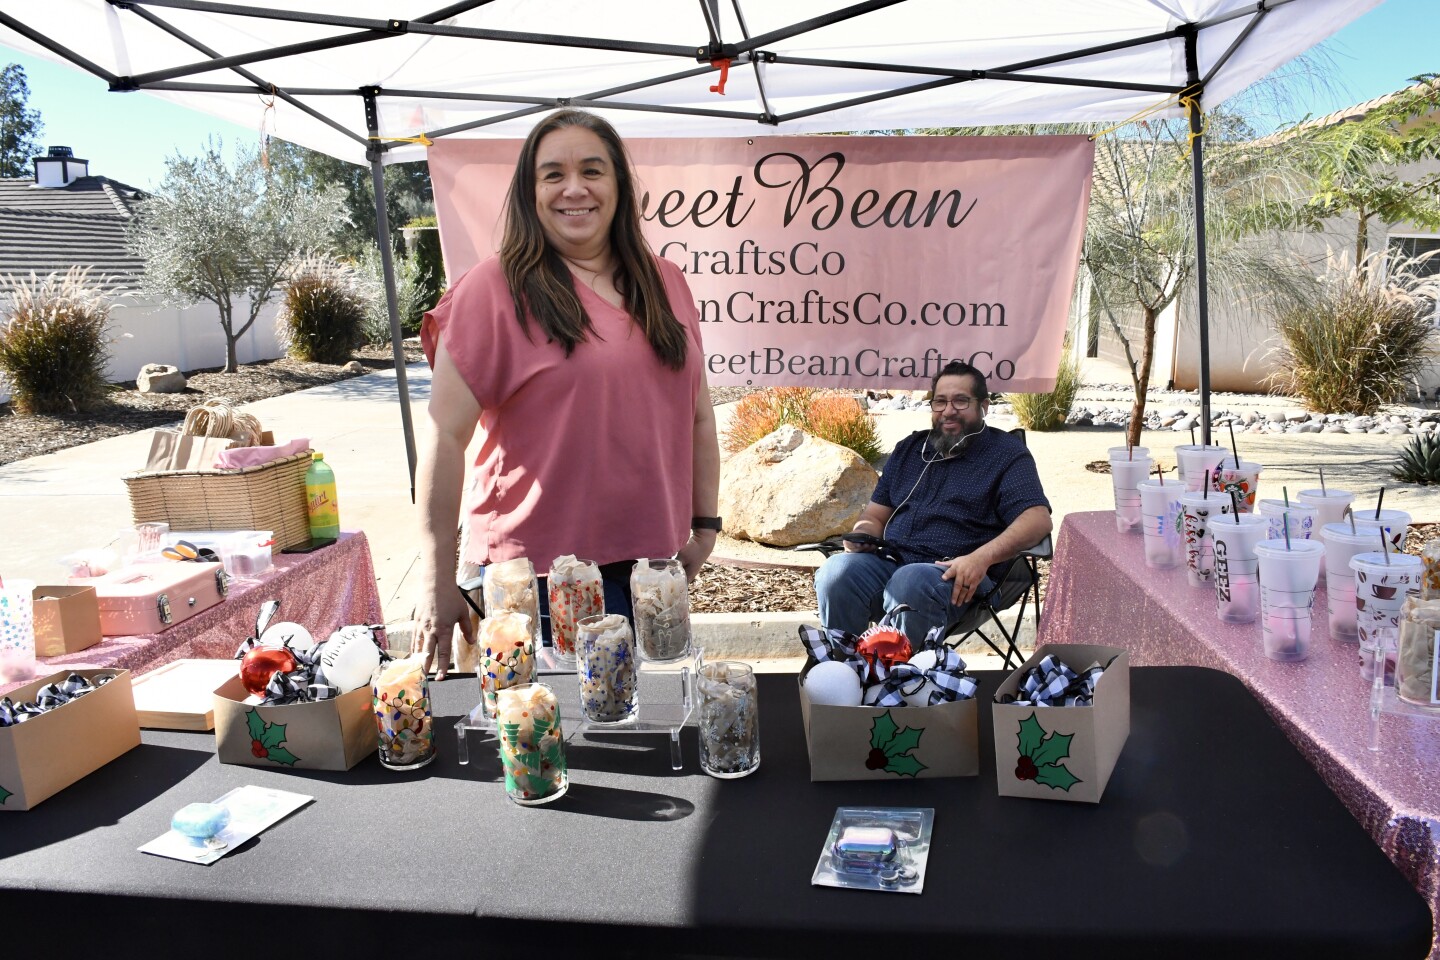 Elizabeth and Martin Mares working their Sweet Bean Crafts booth. They had an assortment of cups and ornaments.